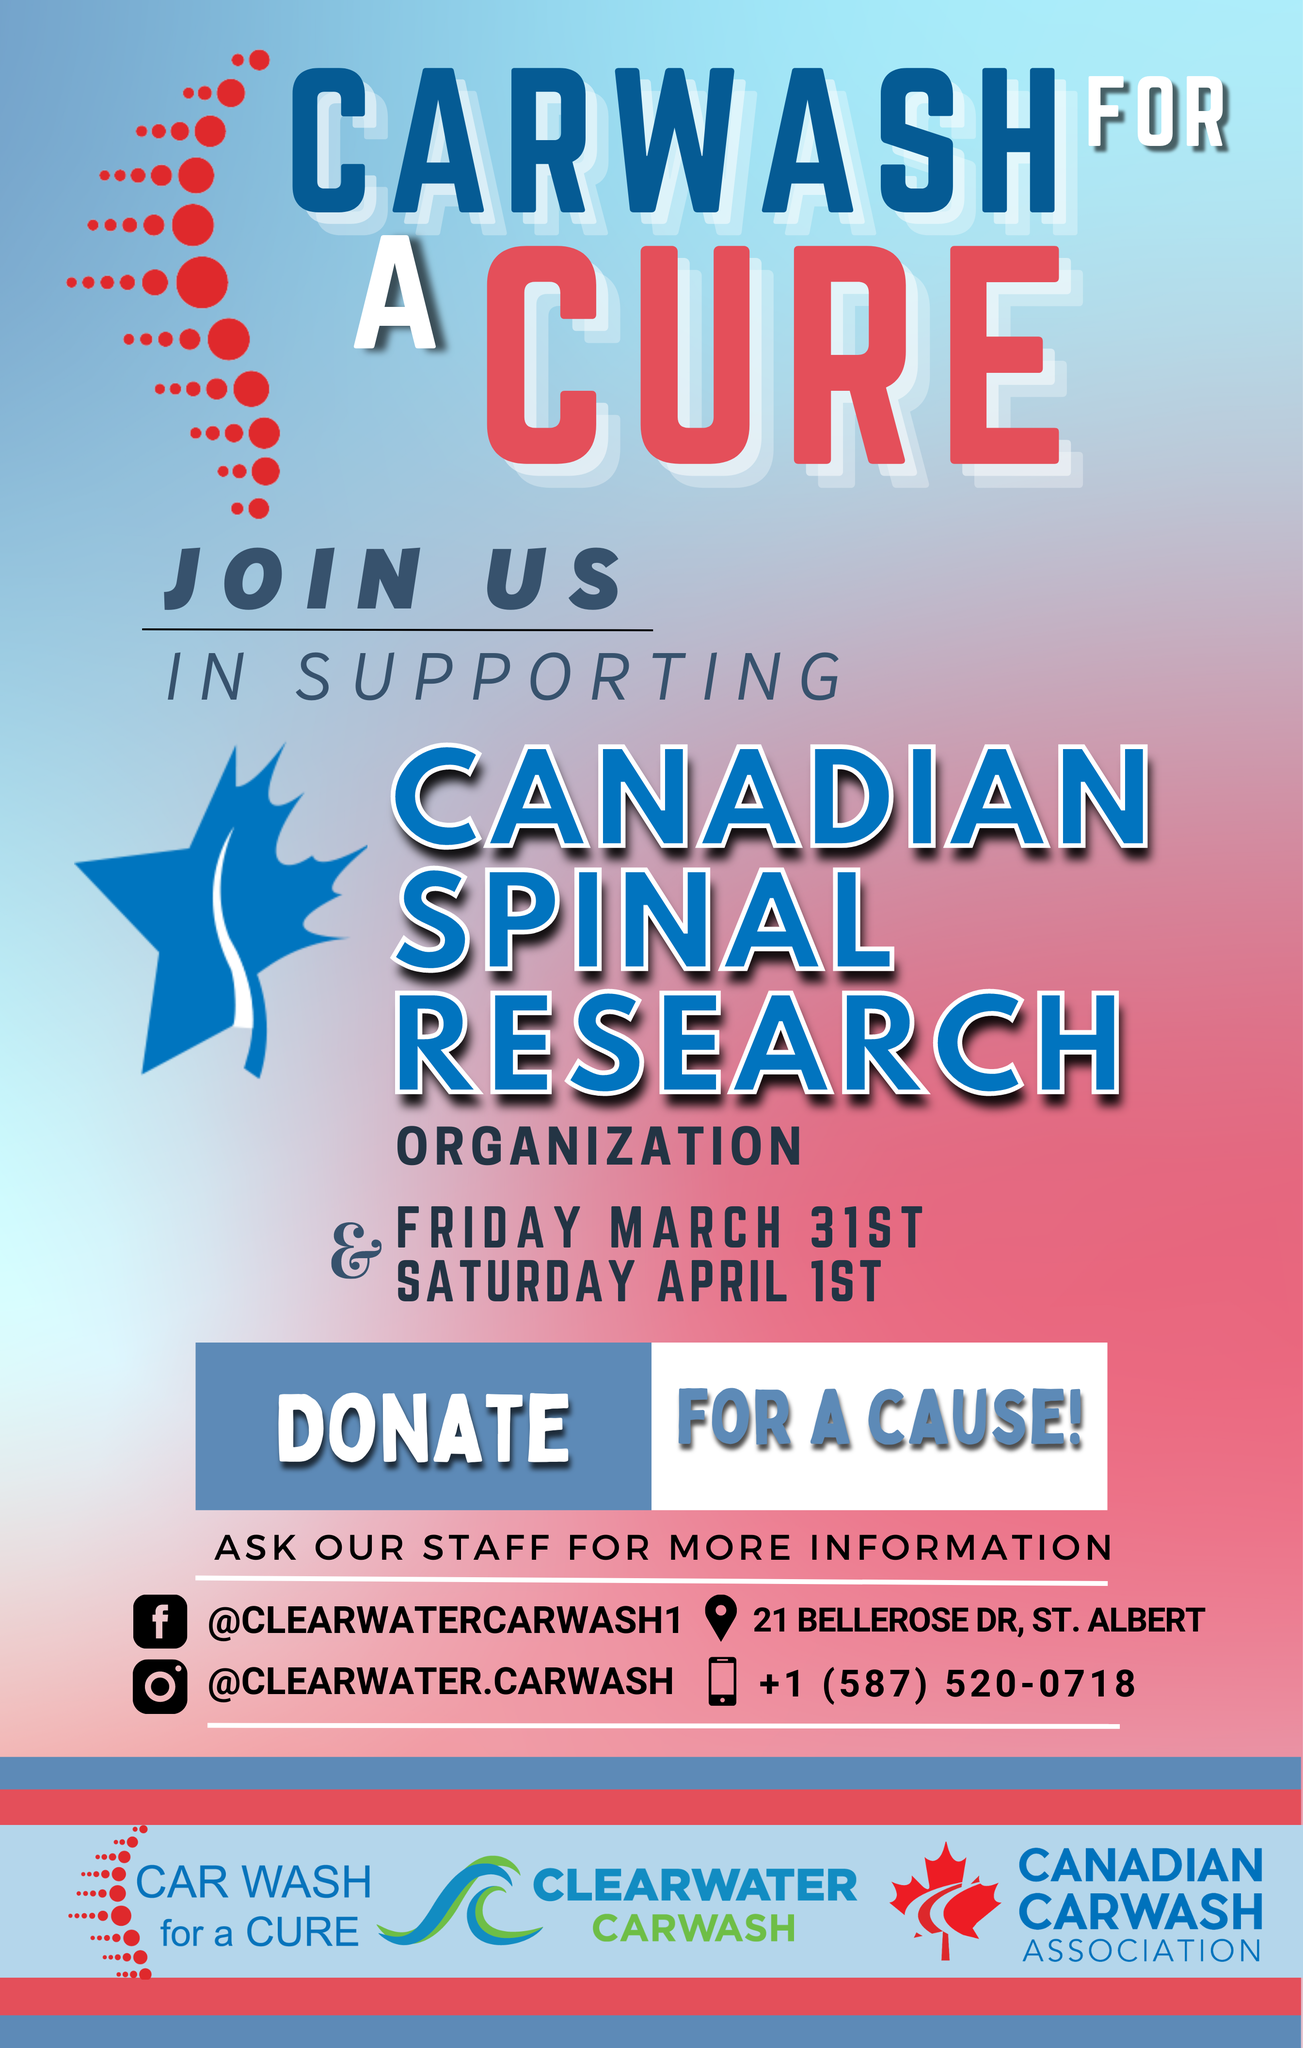 Poster promoting the donation event happening at ClearWater CarWash to support the Canadian Spinal R